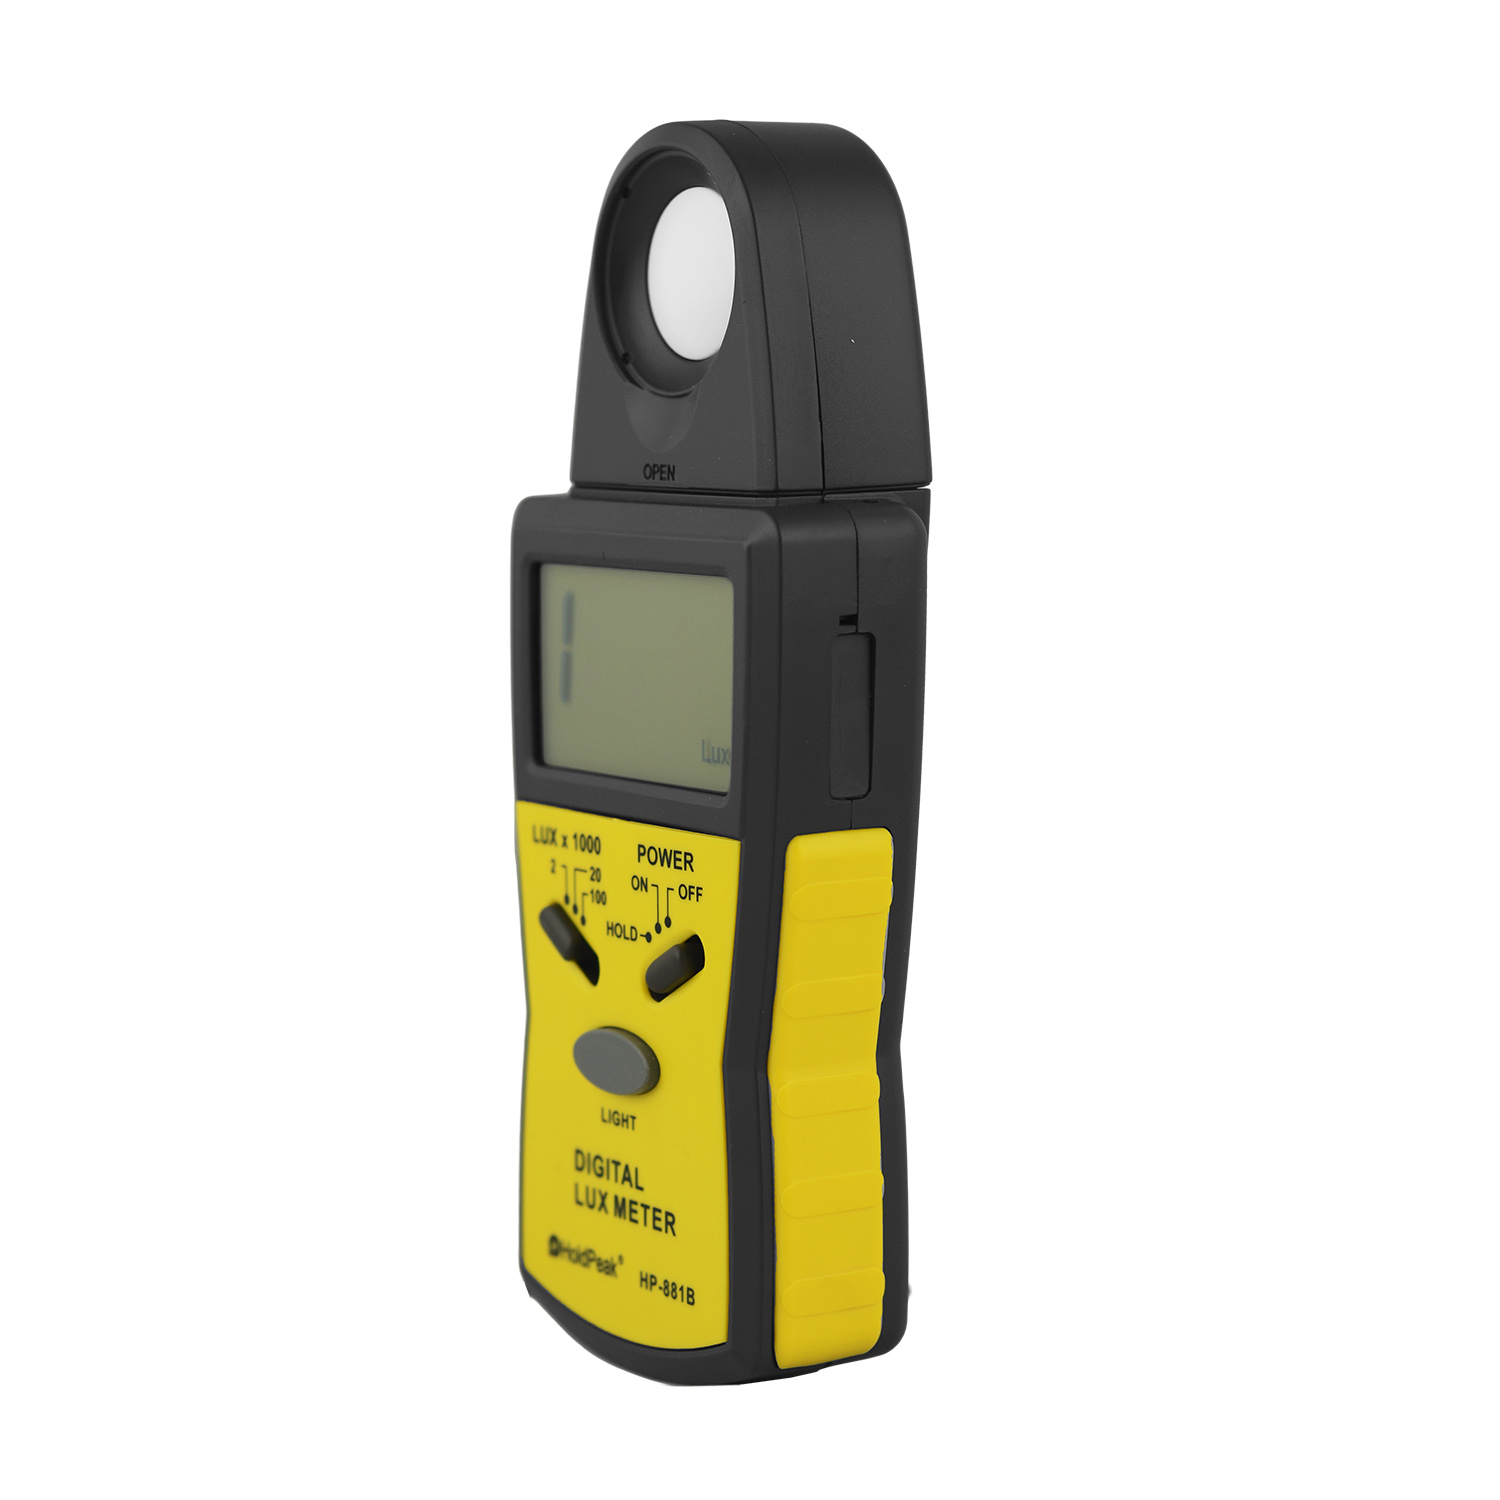 HoldPeak professional digital lux meter with many models for physical